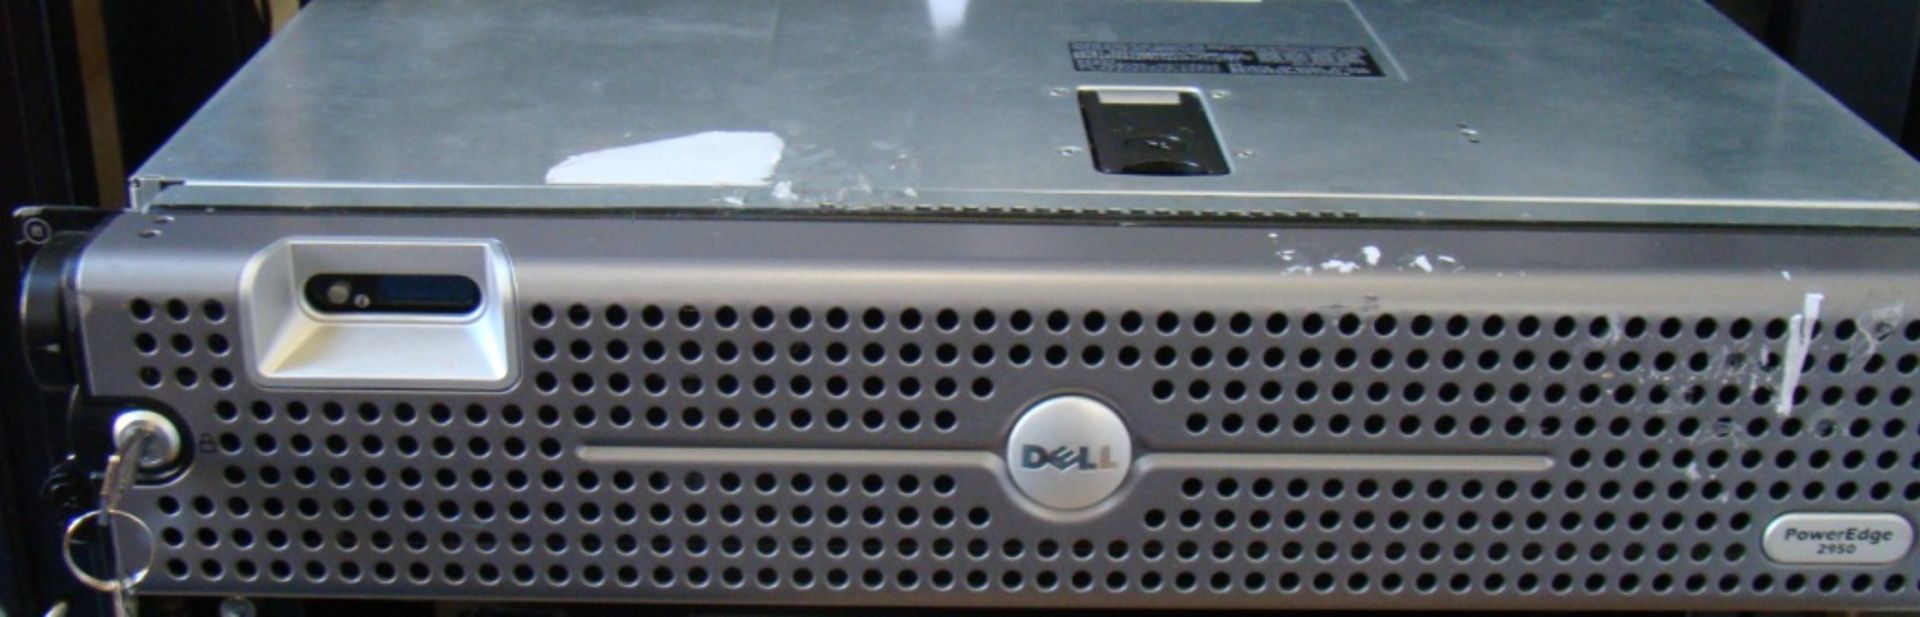 Dell 2950 PowerEdge 2 * 2.66Ghz Quad Core 1333Mhz , 22GB 667 Mhz Memory, 1 * 67Gb HDD, 1 * - Image 9 of 9